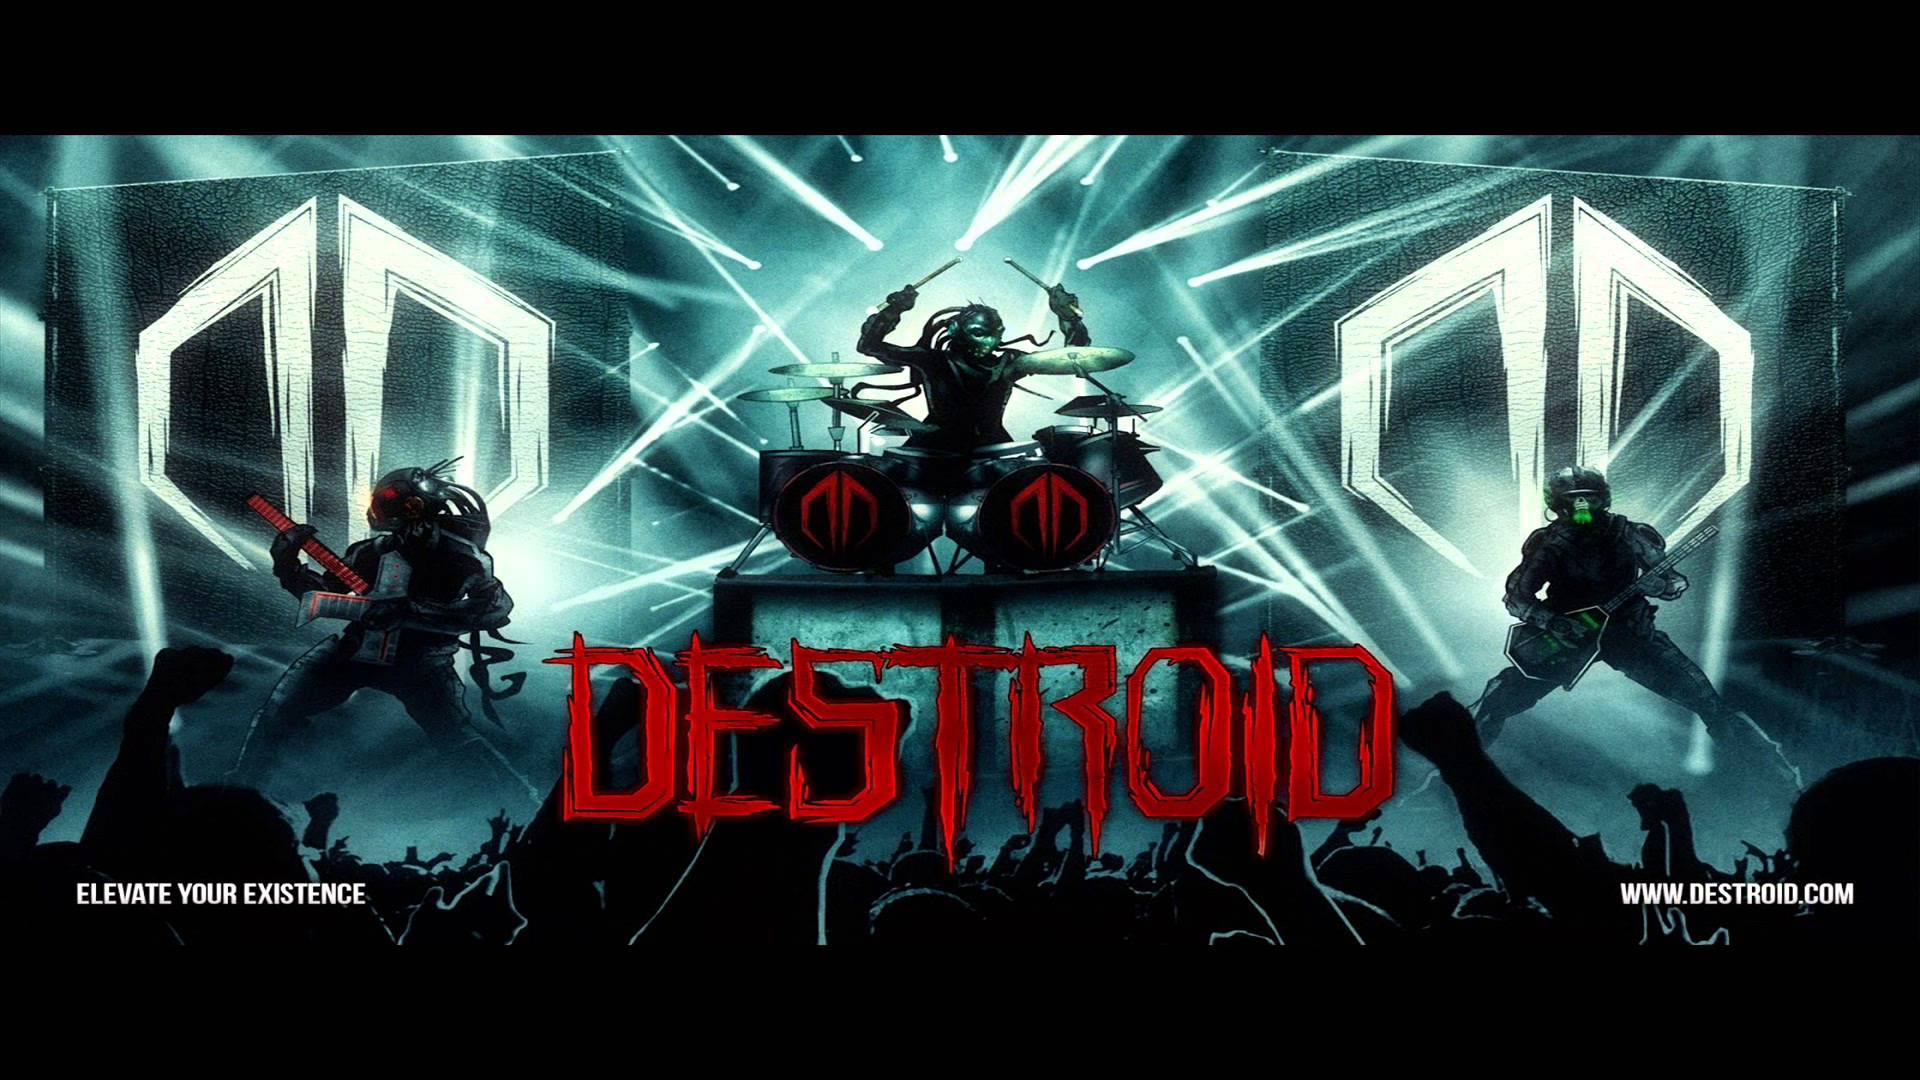 Displaying Image For Destroid Excision Wallpaper